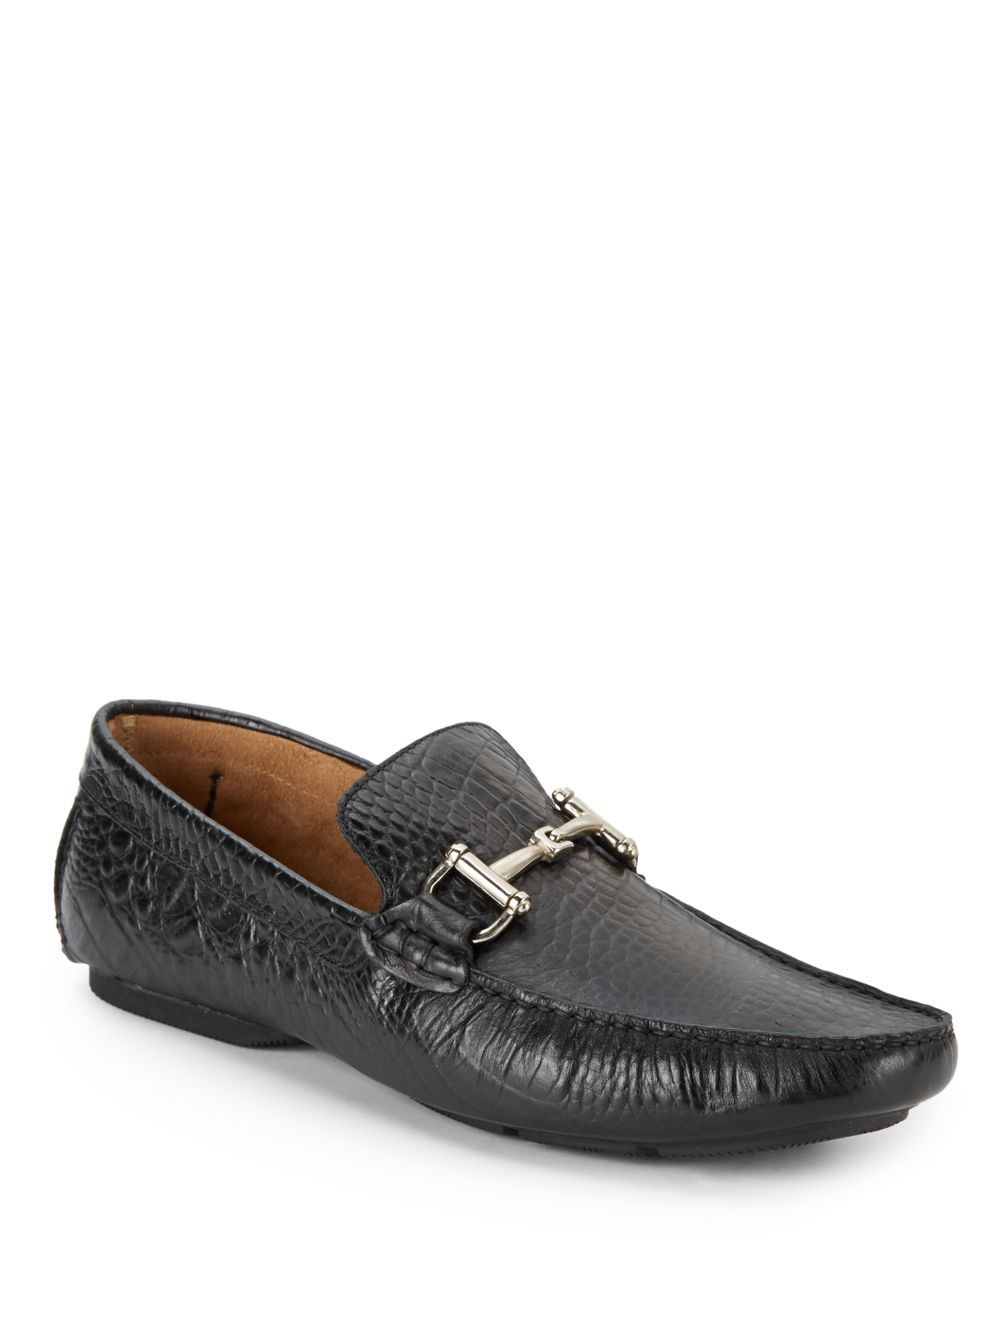 Lyst - Steve Madden Bankkrol Crocodile-Embossed Leather Loafers in ...